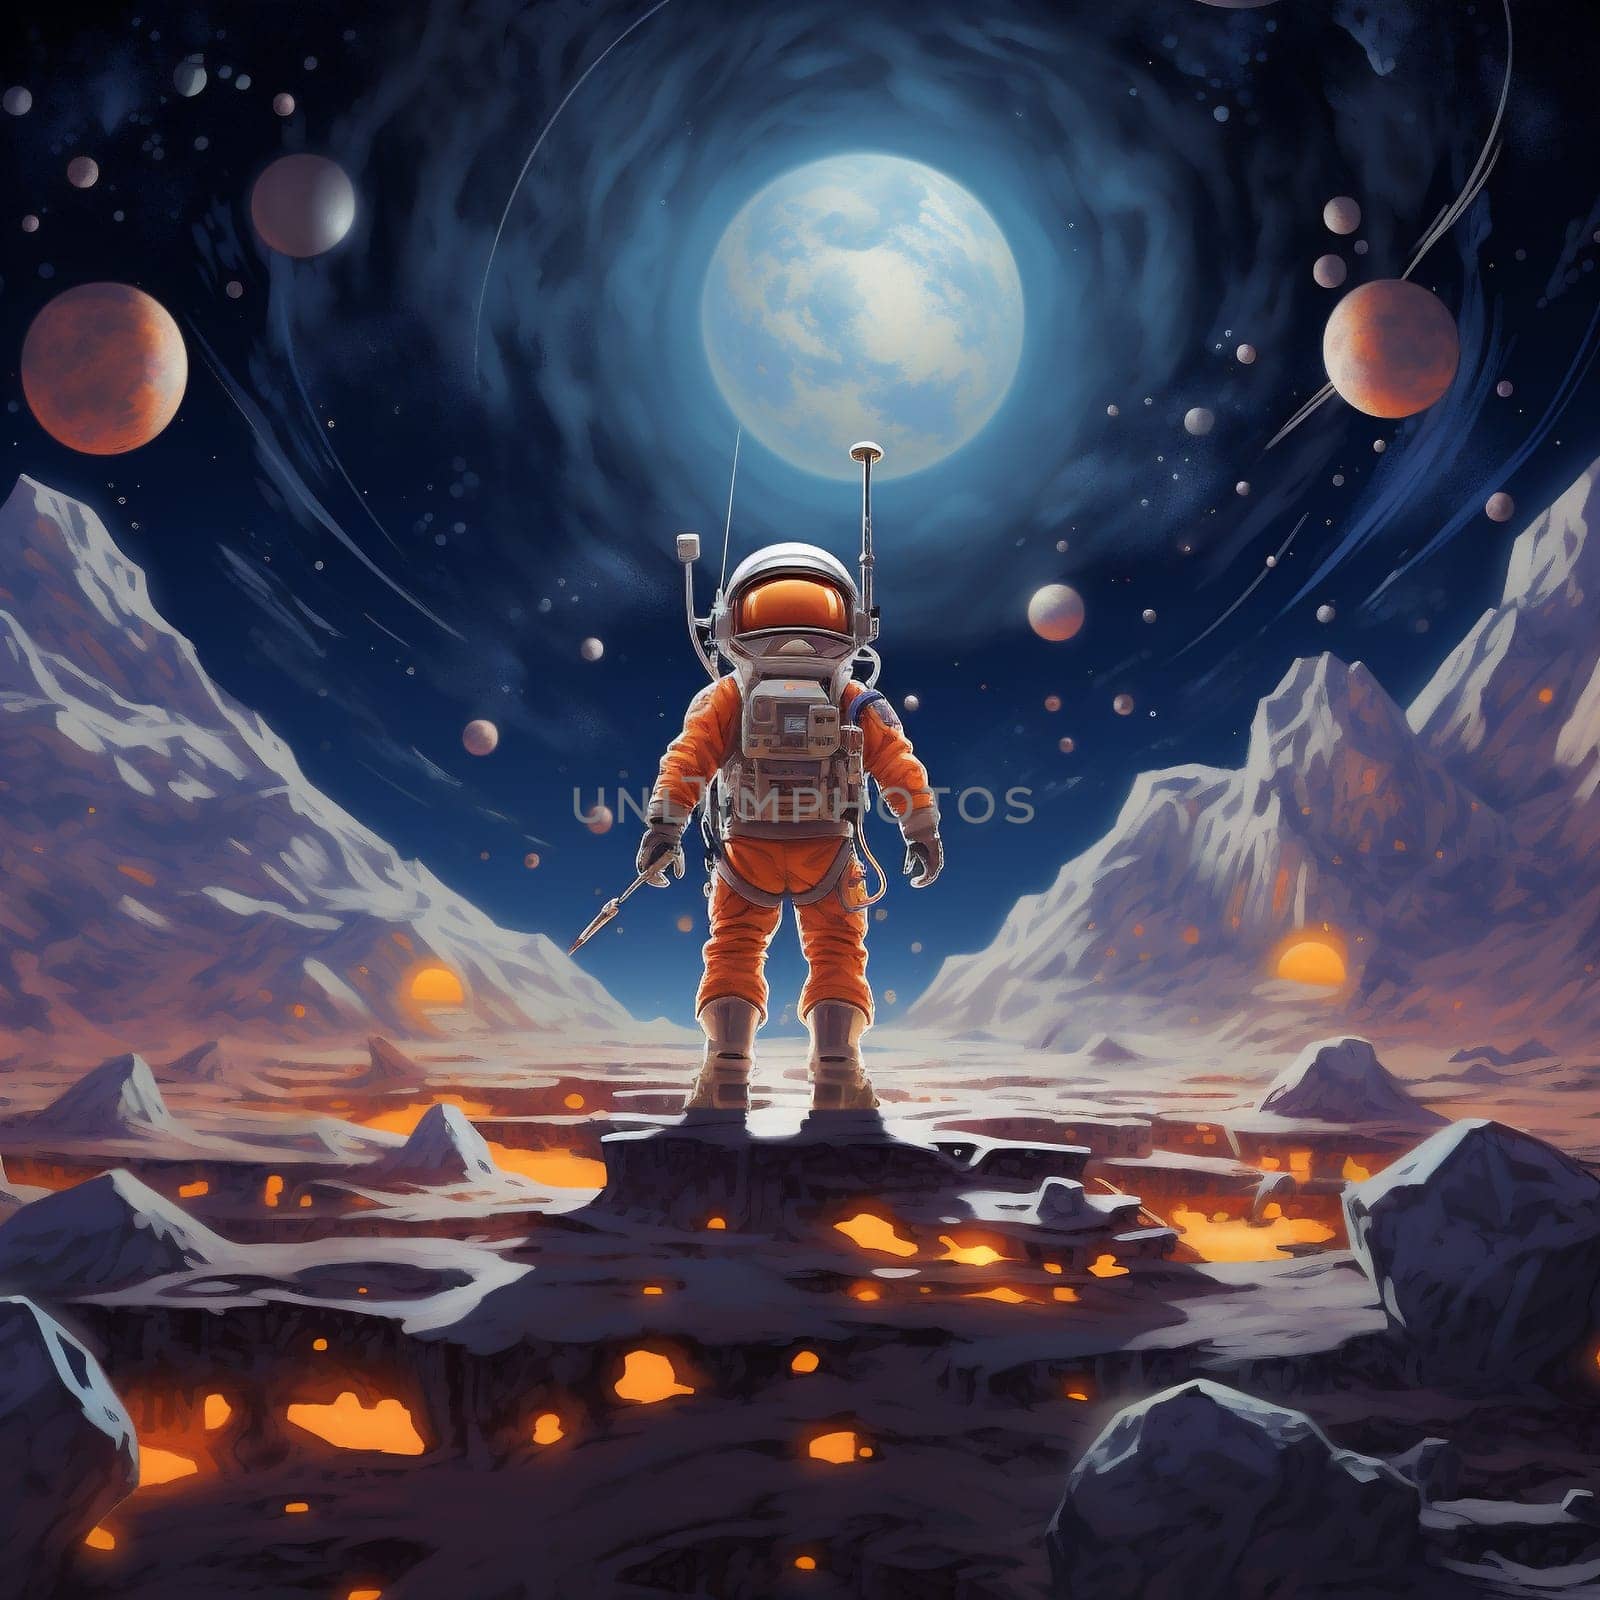 Astronaut in Space Suit Standing on an Unknown Planet Looking at the Galaxy. High Tech Concept of New Planet Colonization and Space Travel.